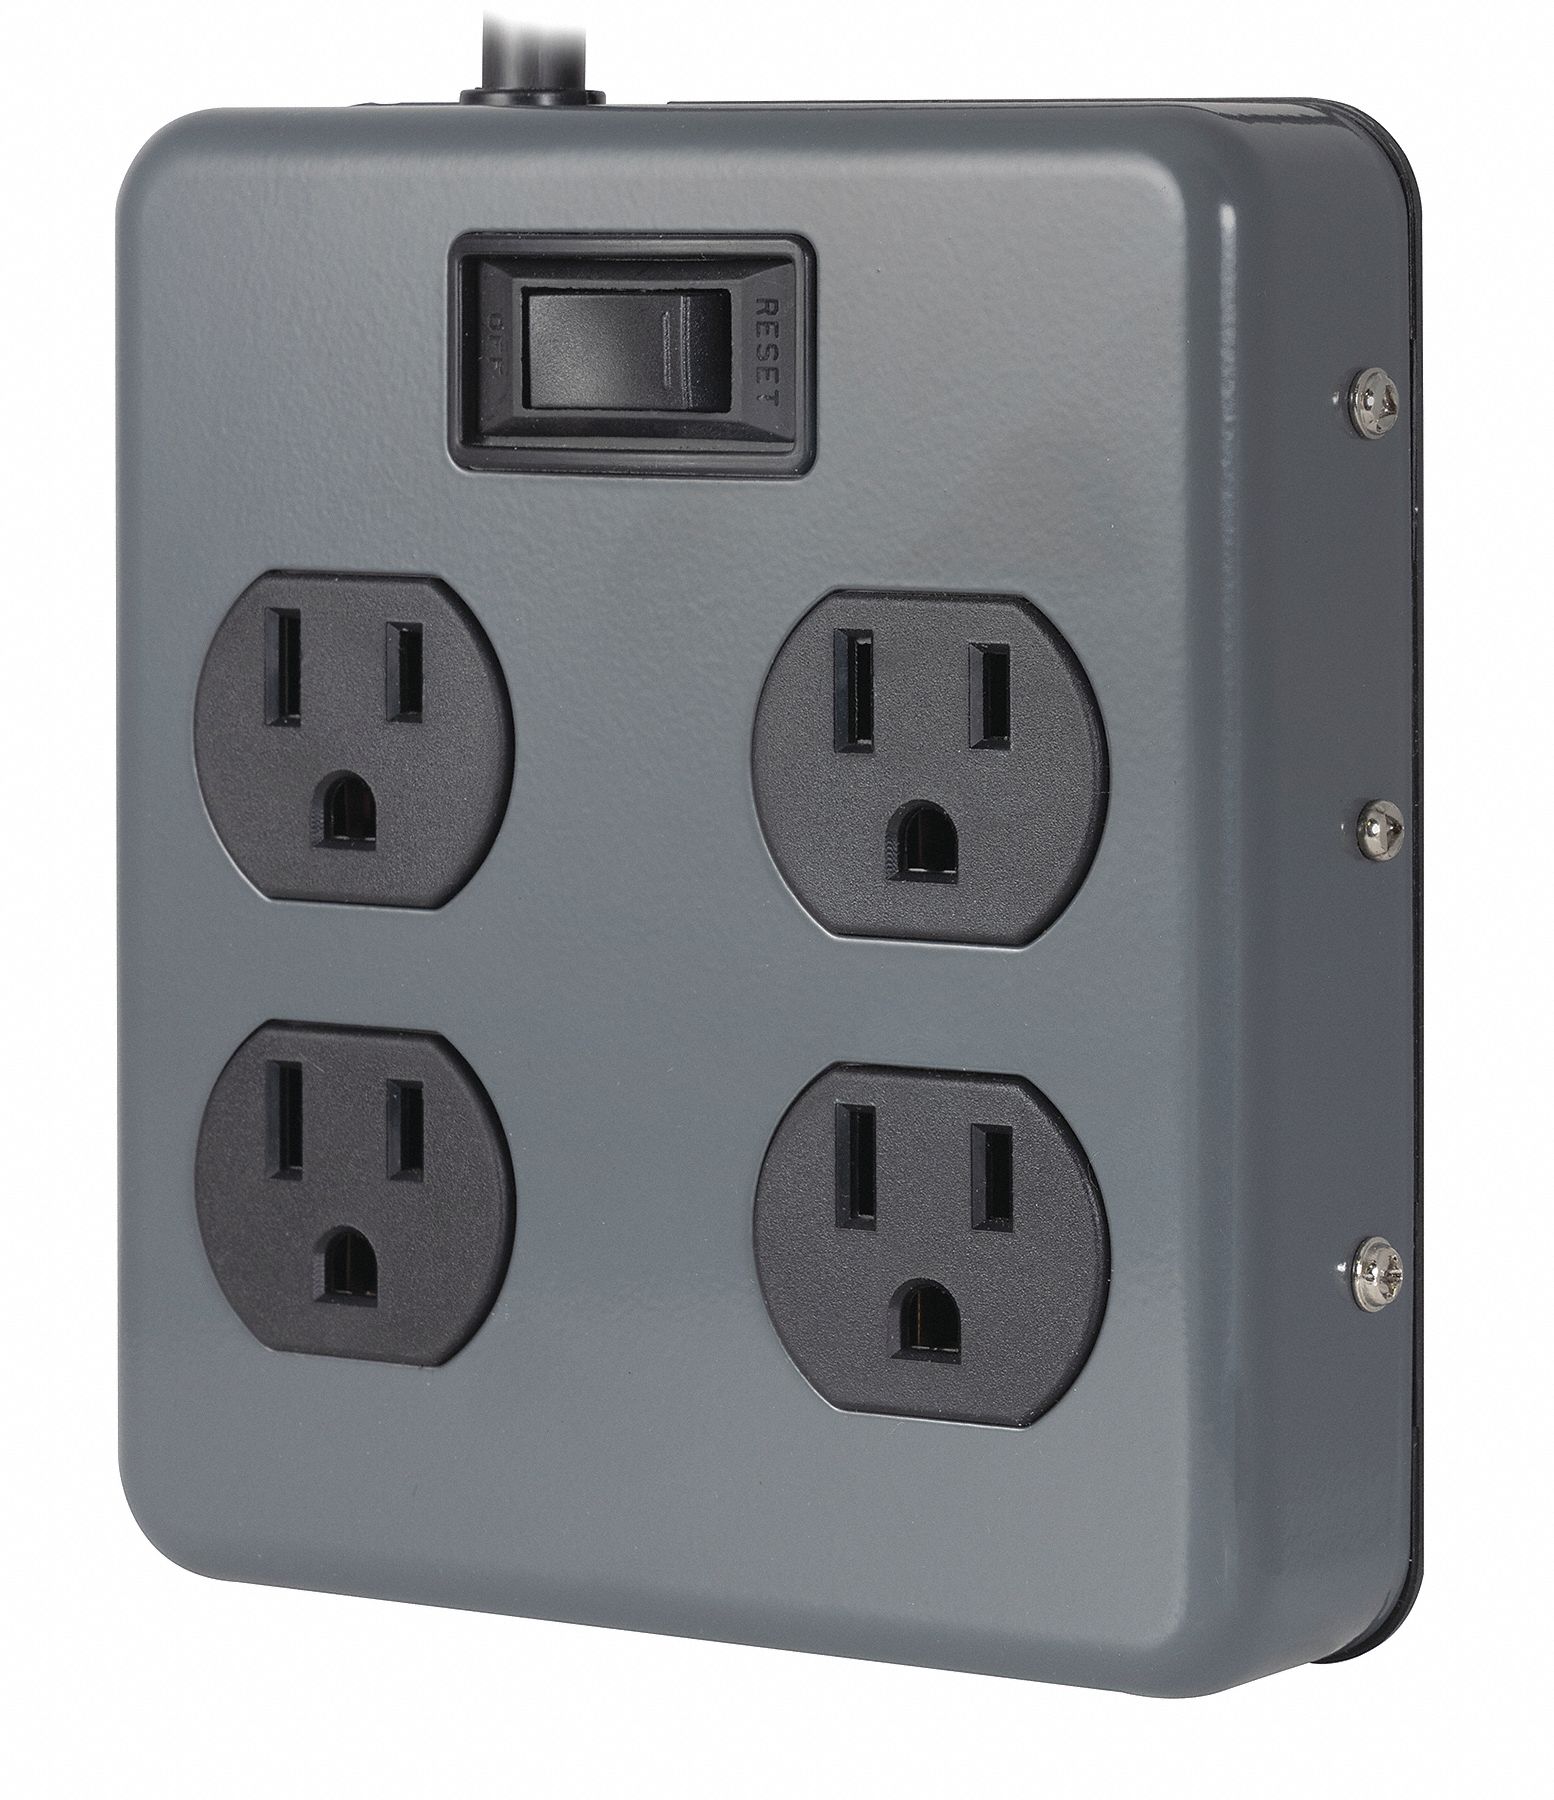 Outlet Strip, Commercial And Industrial, 4 Outlets, 15A, 6 Ft. Length